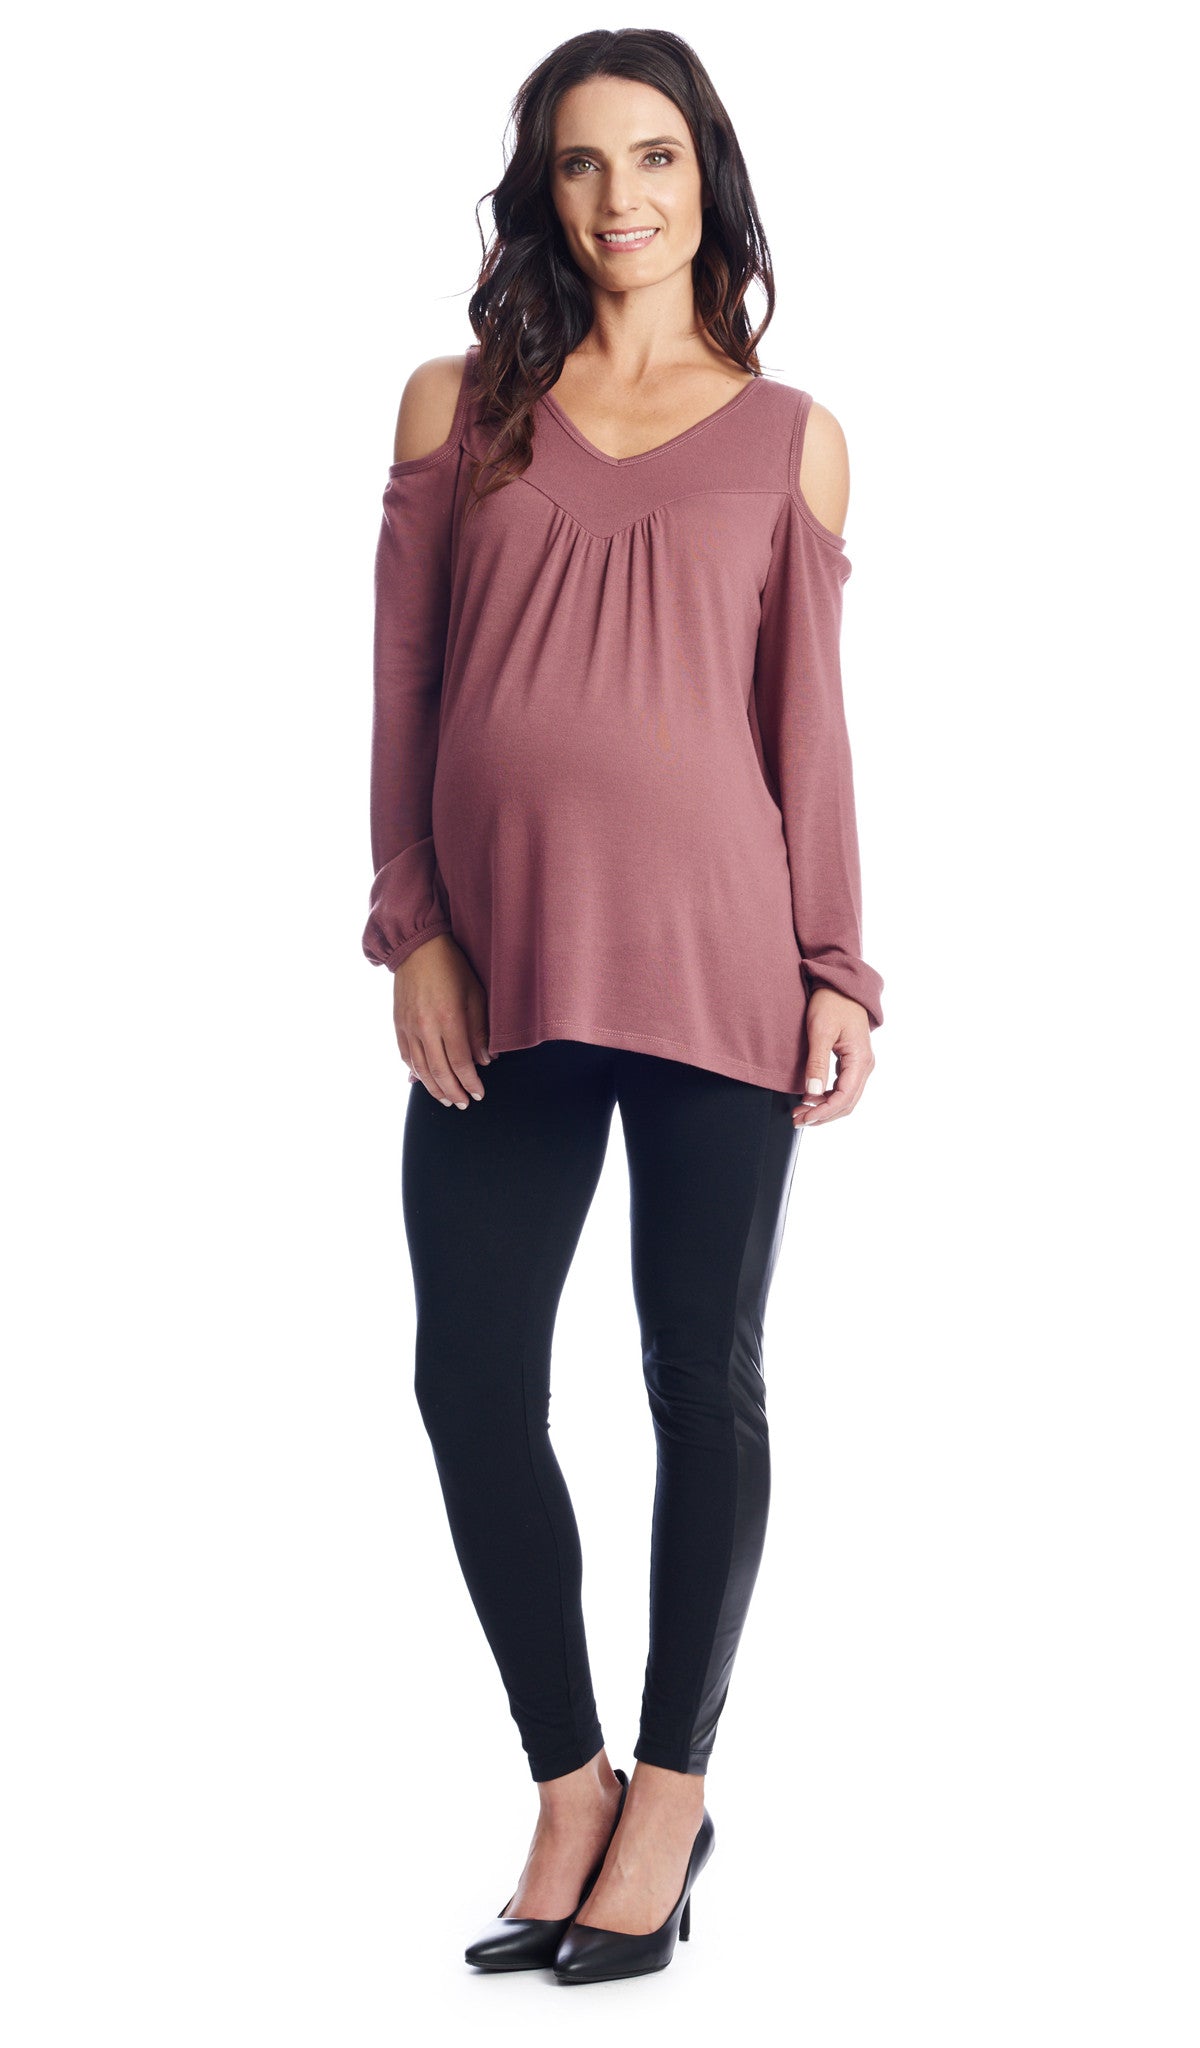 Mauve Nora full length shot of top worn by pregnant woman.